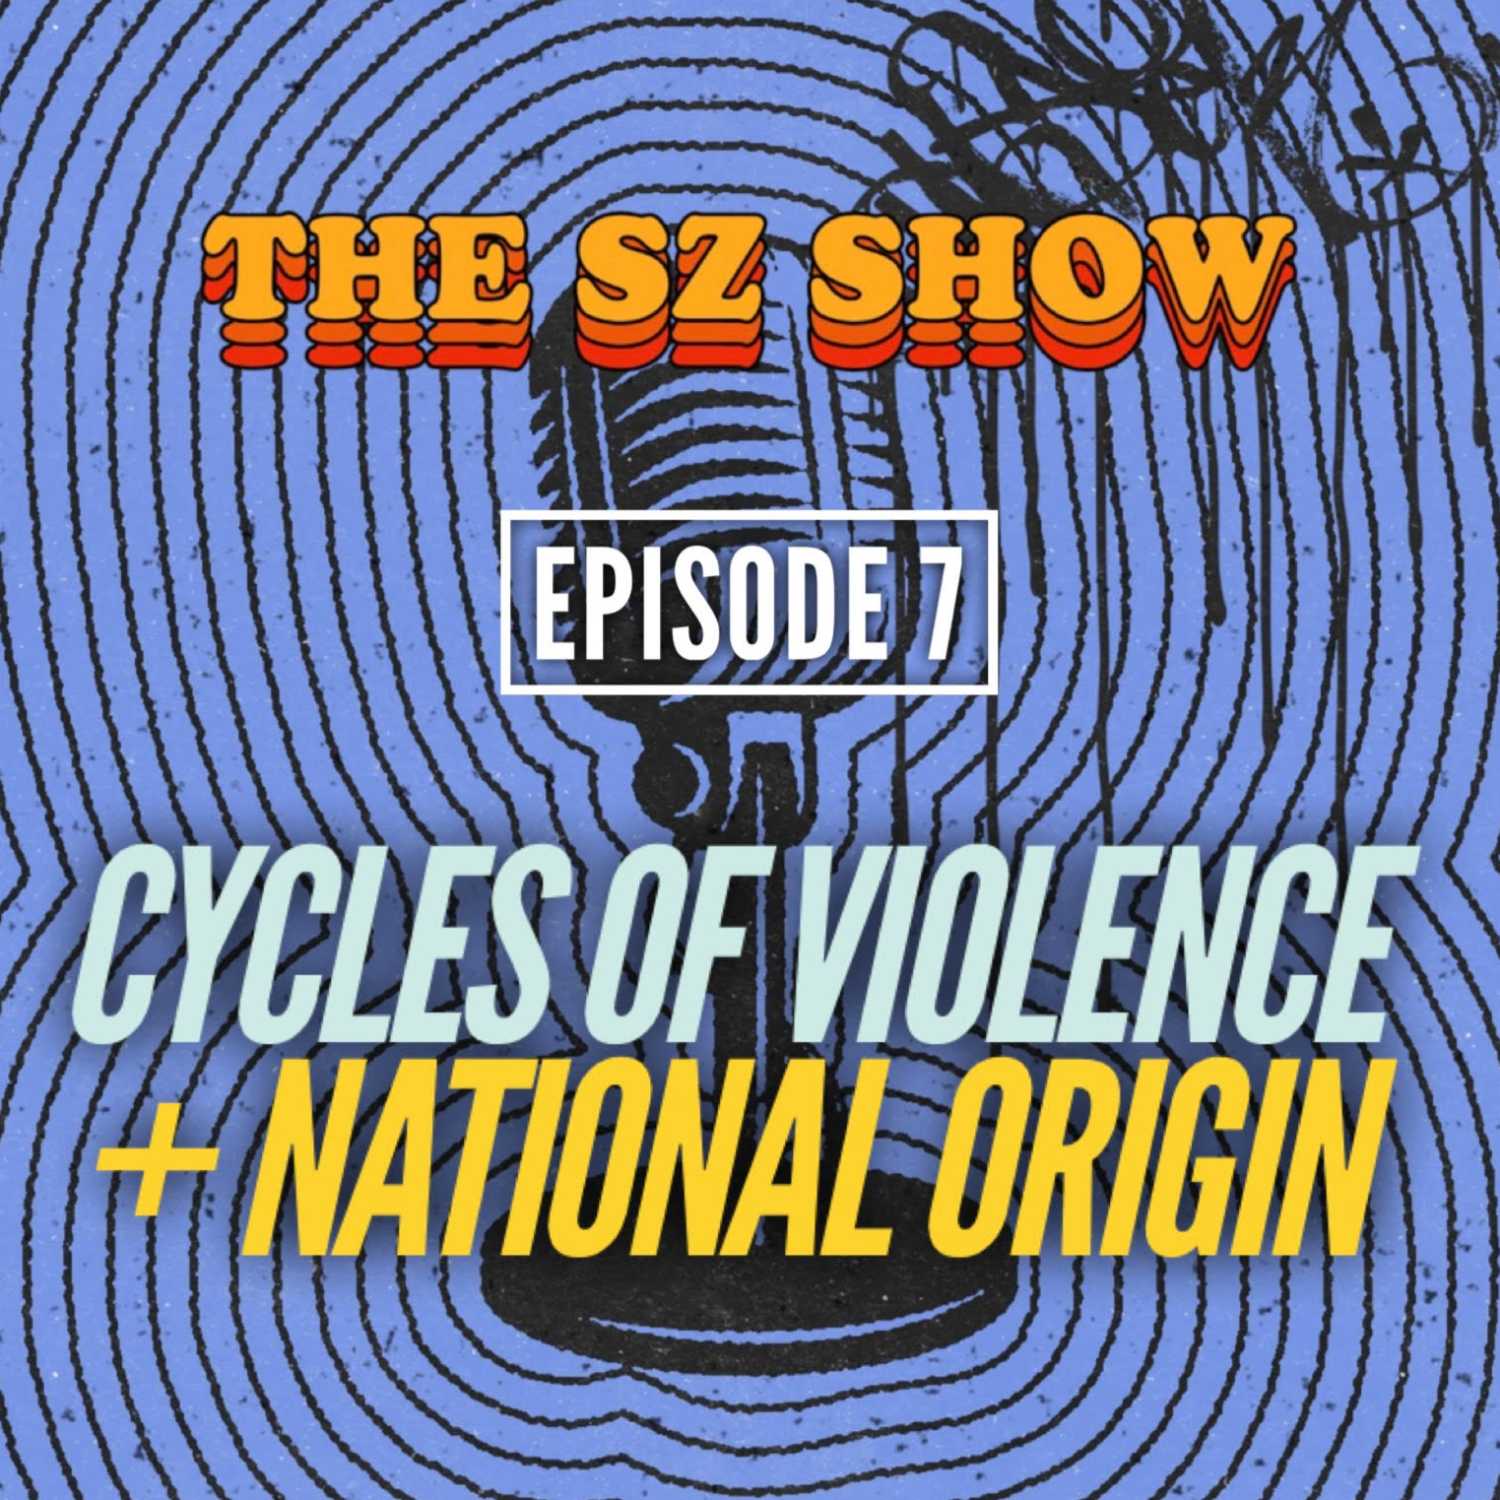 Episode 7: Dissecting Cycles of Violence + National Origin